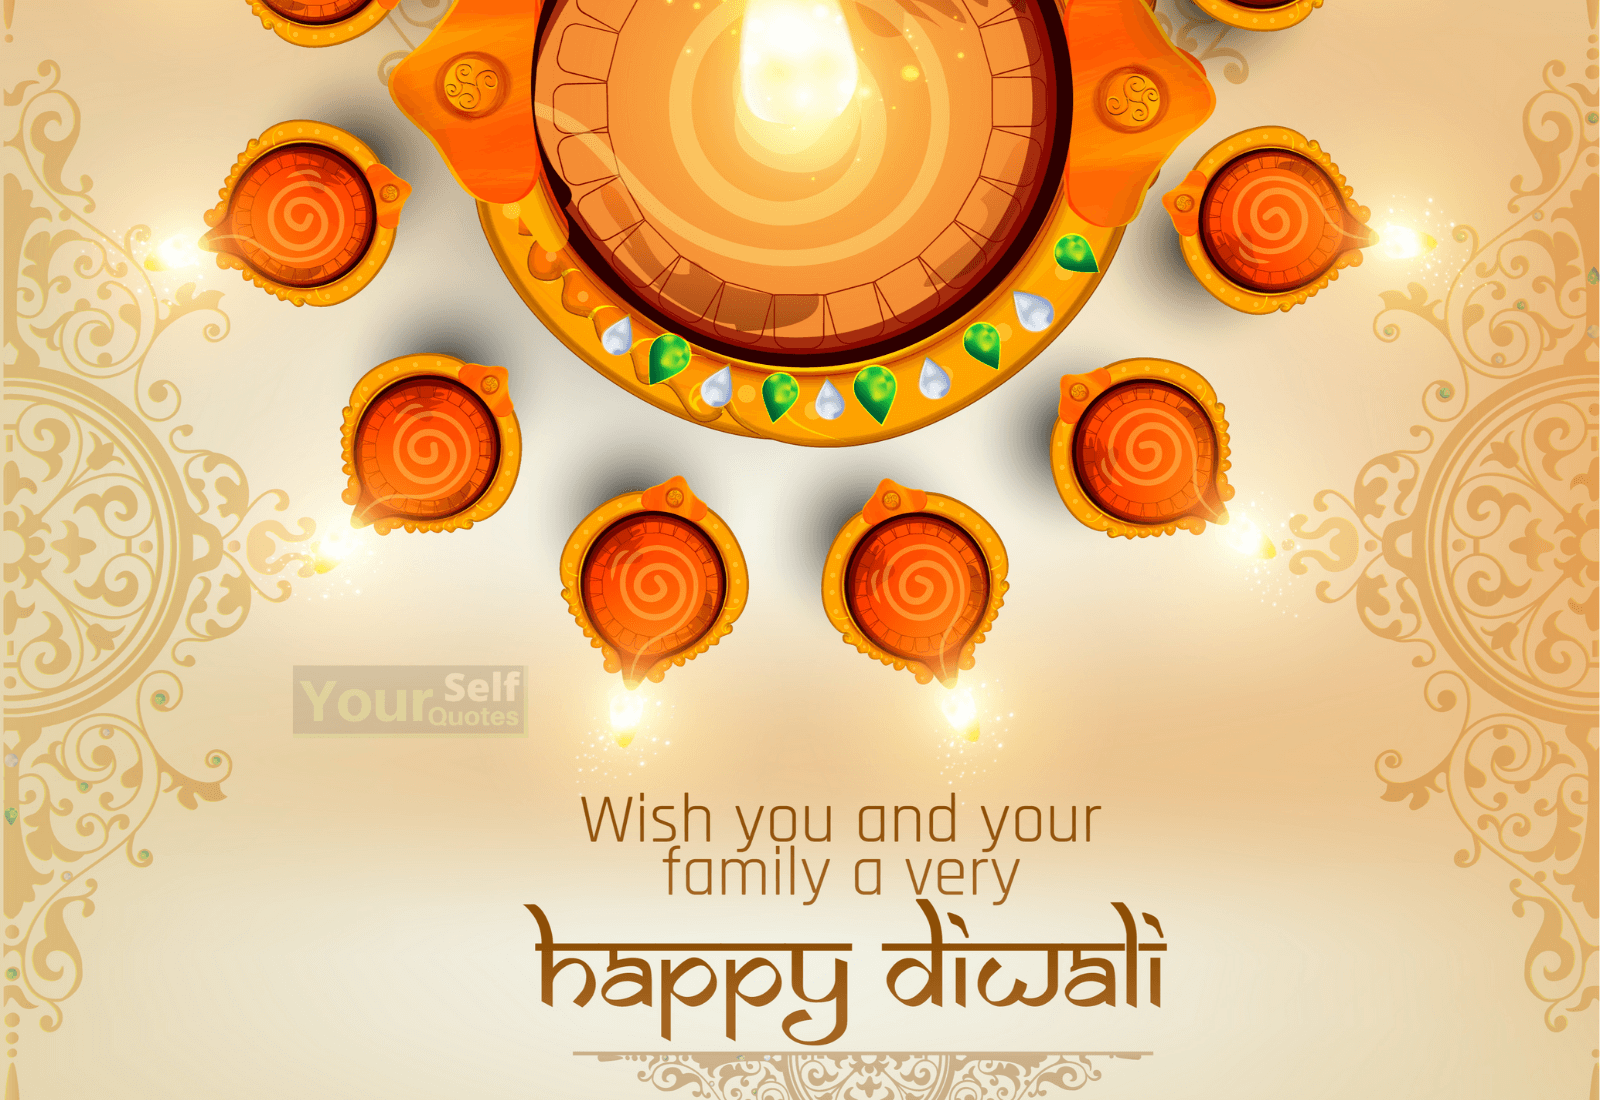 2019 Happy Diwali Images, Photos, Pictures, Wallpapers - Happy Diwali - HD Wallpaper 